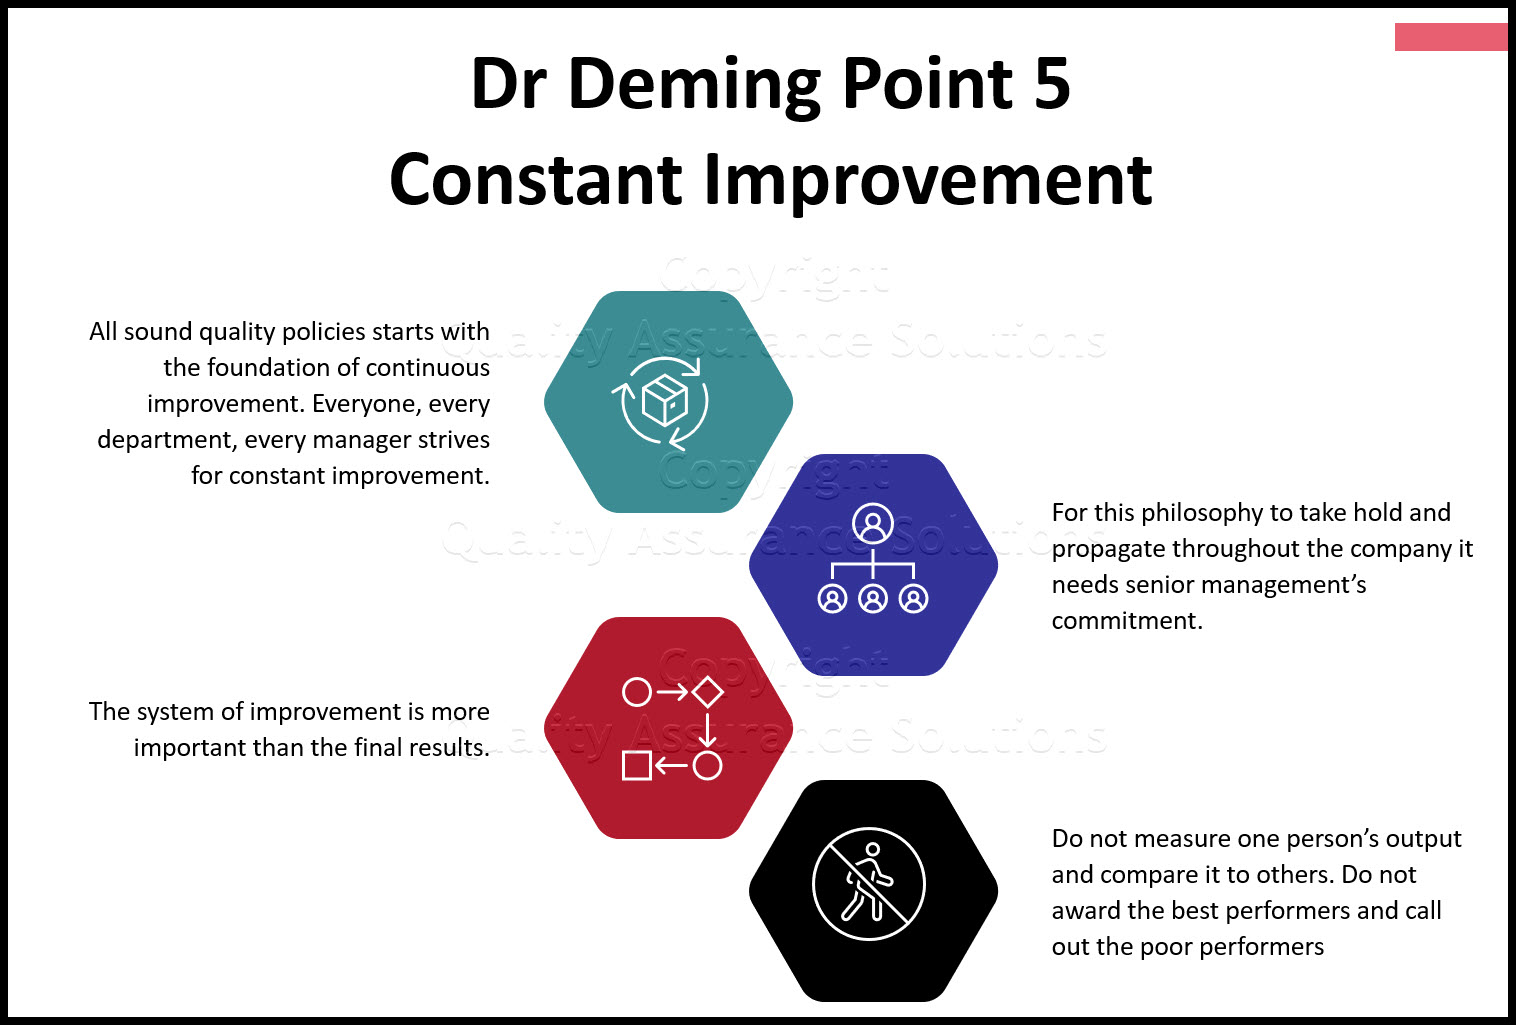 Dr Deming Point 5 views on constant improvement. Improve constantly and forever the system of production and service.